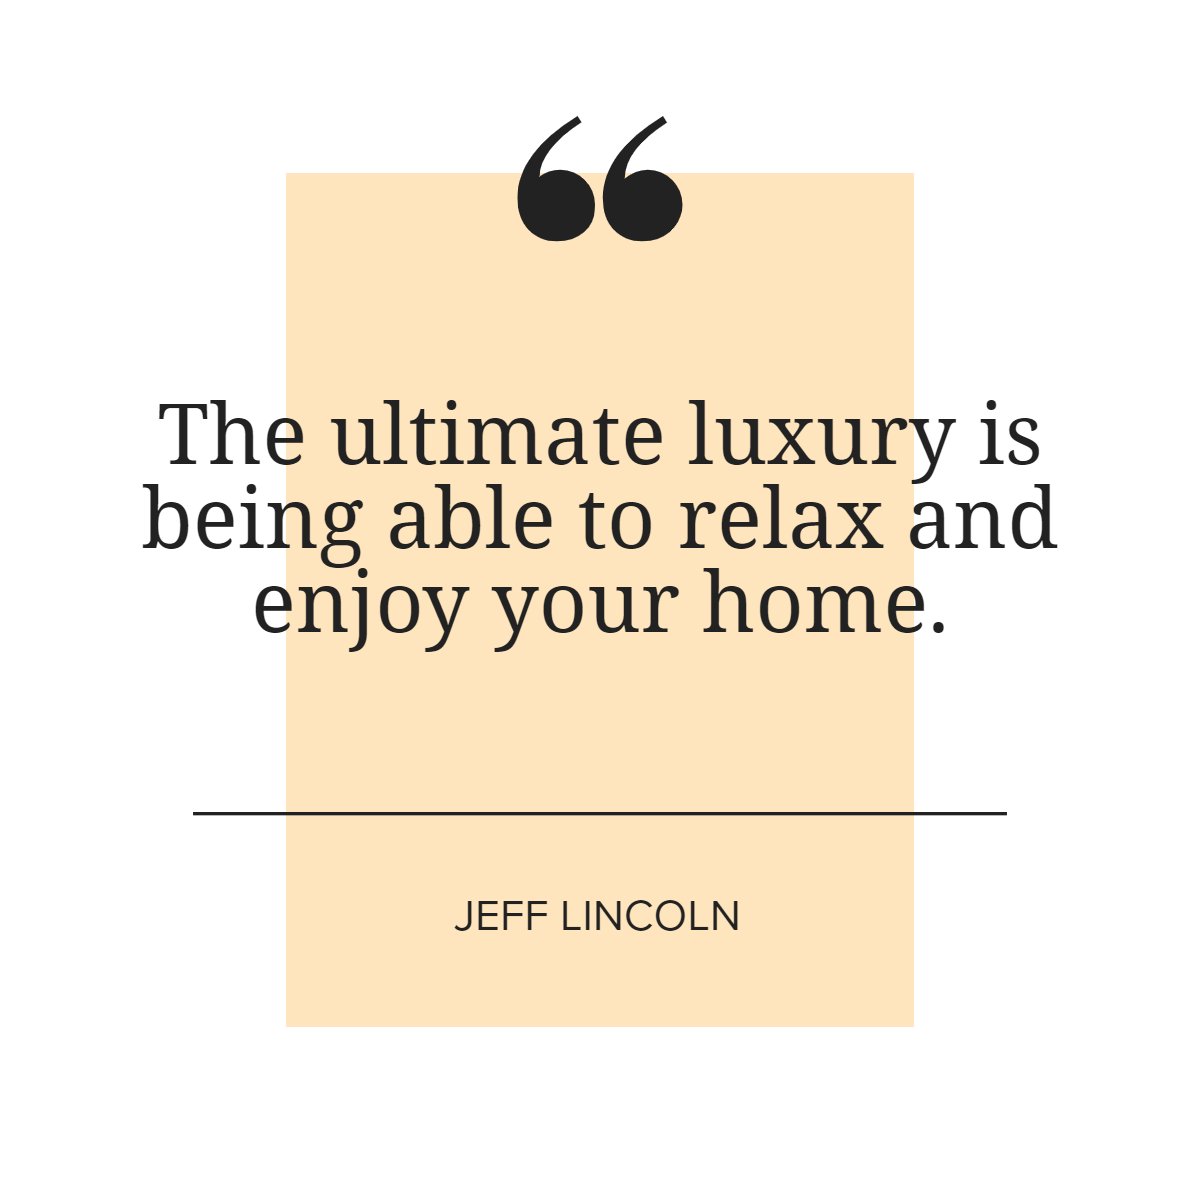 'The ultimate luxury is being able to relax and enjoy your home'
– Jeff Lincoln 📖

#luxurylifestyle    #luxury    #lovemyhome    #home    #lifestyle    #jefflincoln    #quote    #quoteoftheday✏️
#mattmorano #realestate #realtor #mooresville #lakenorman #realty